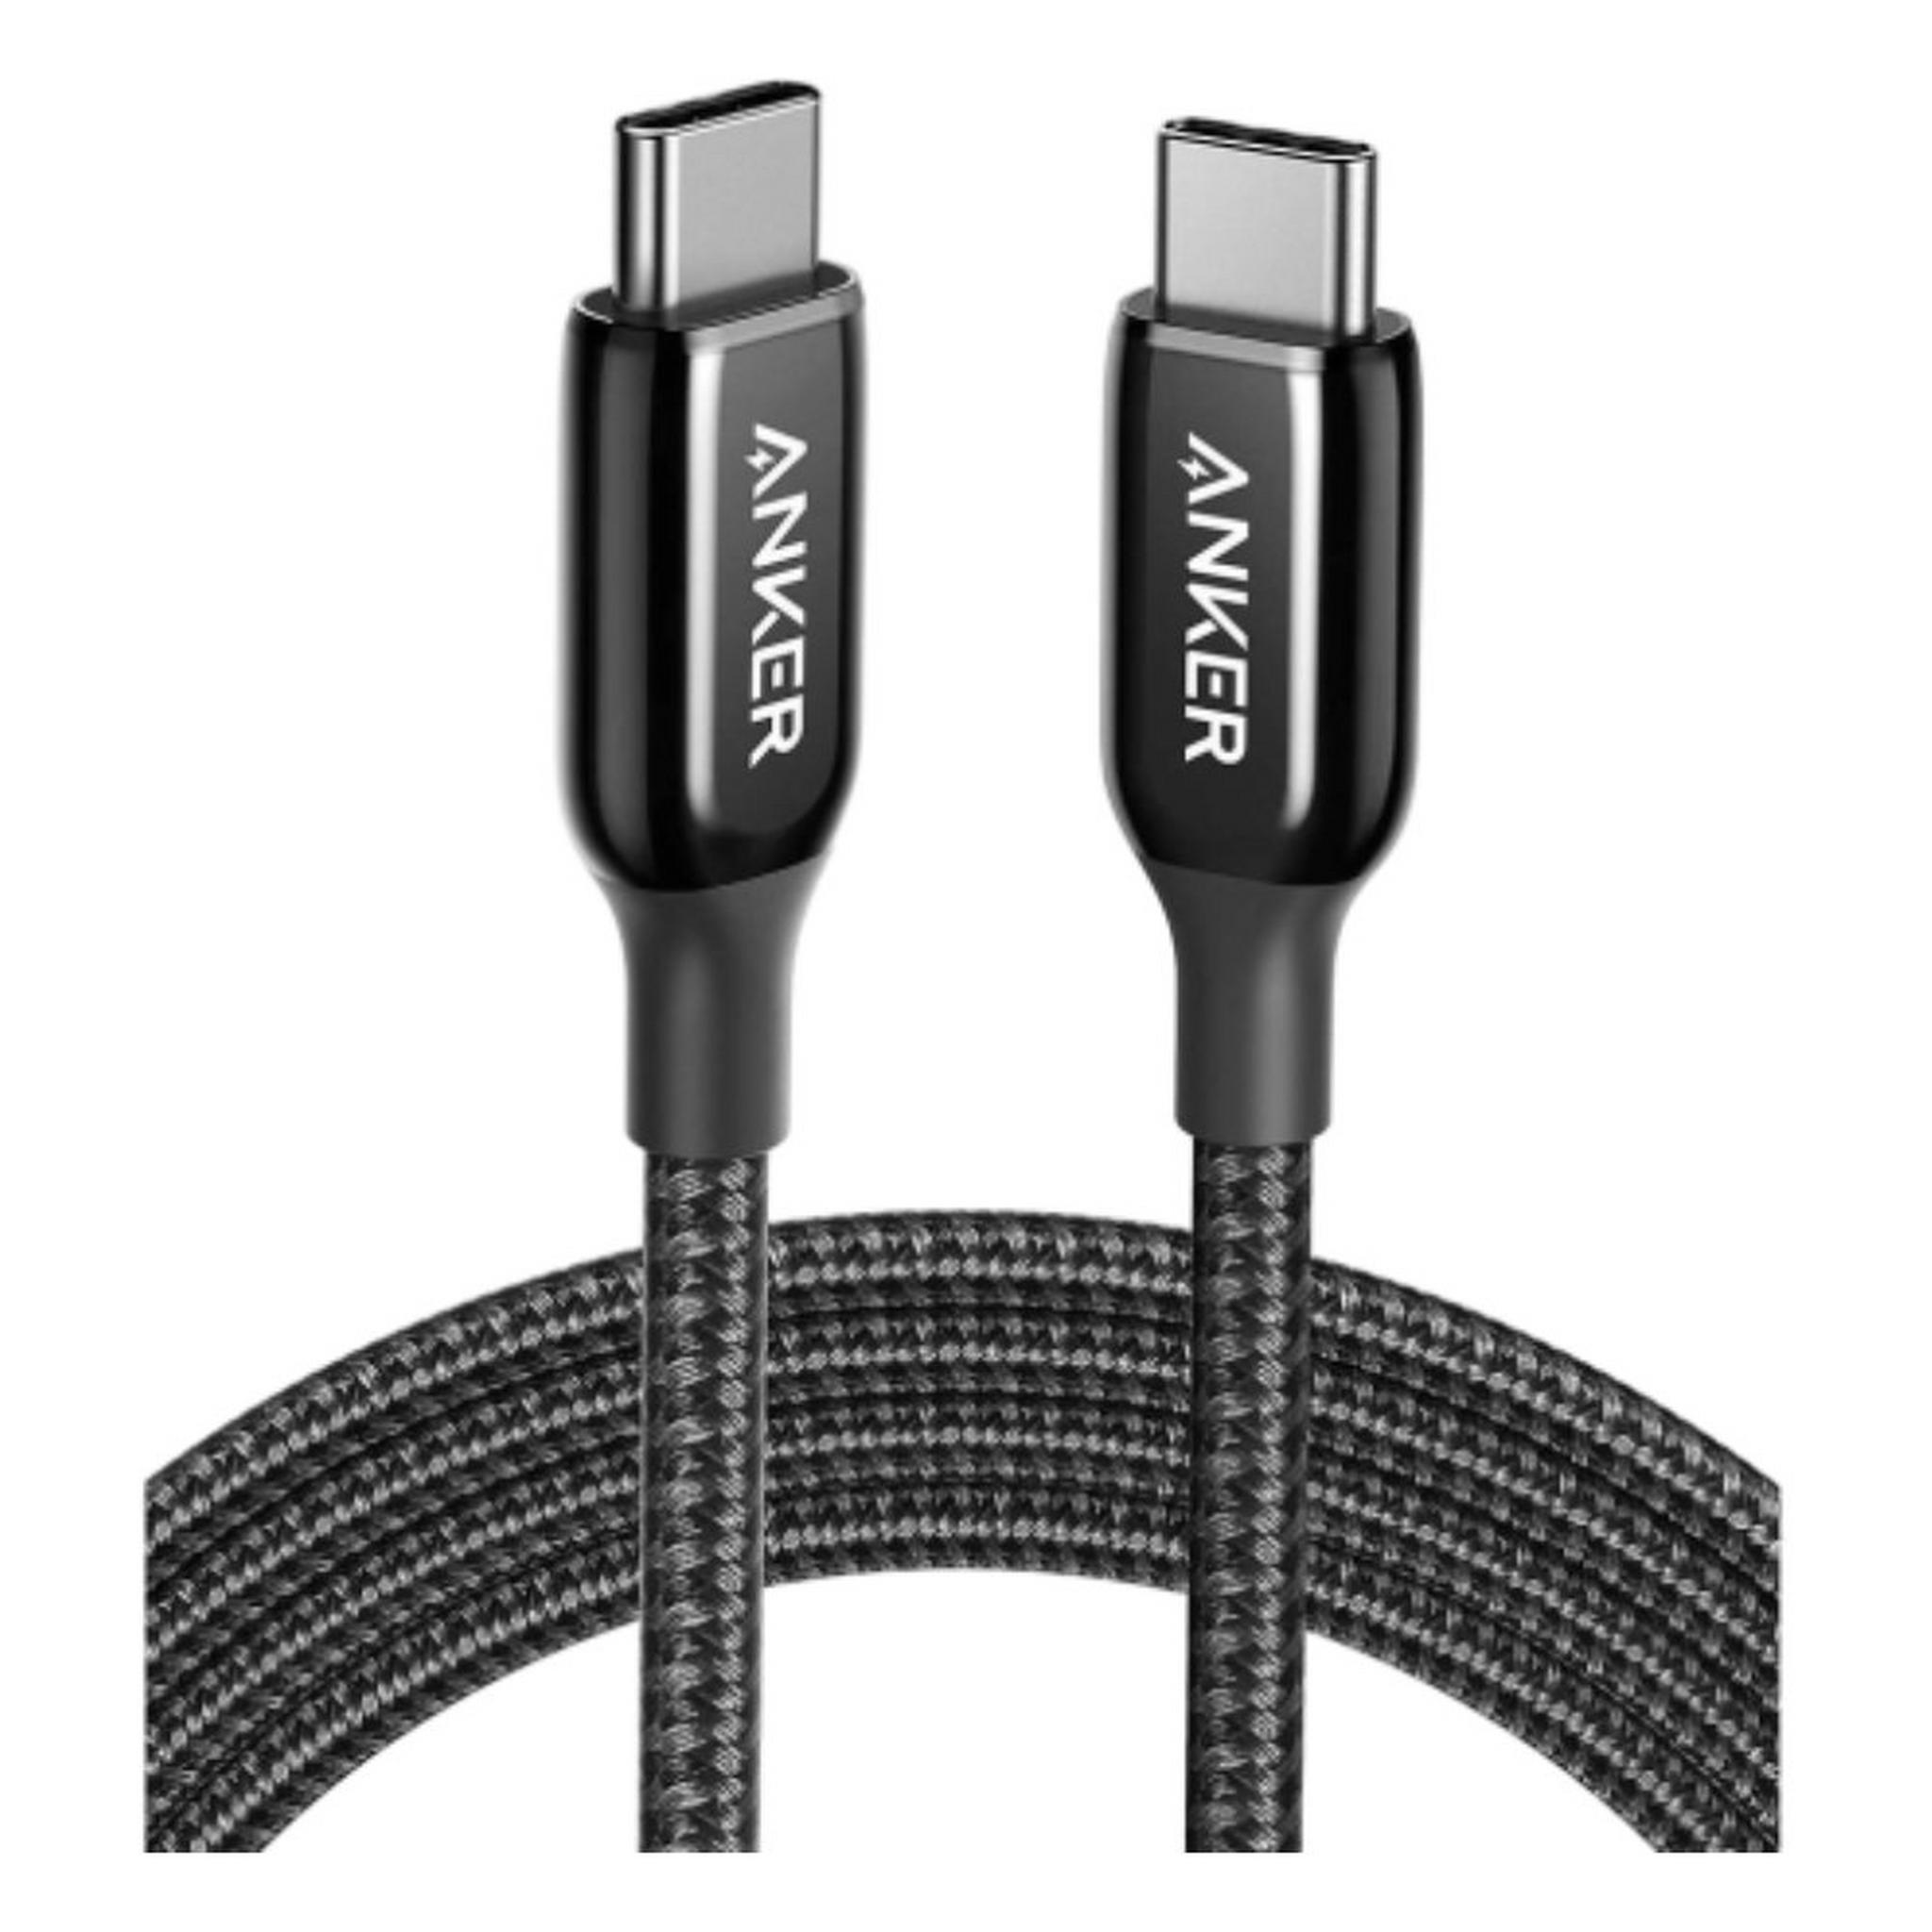 Anker Powerline USB-C to USB-C 3ft Cable - Black